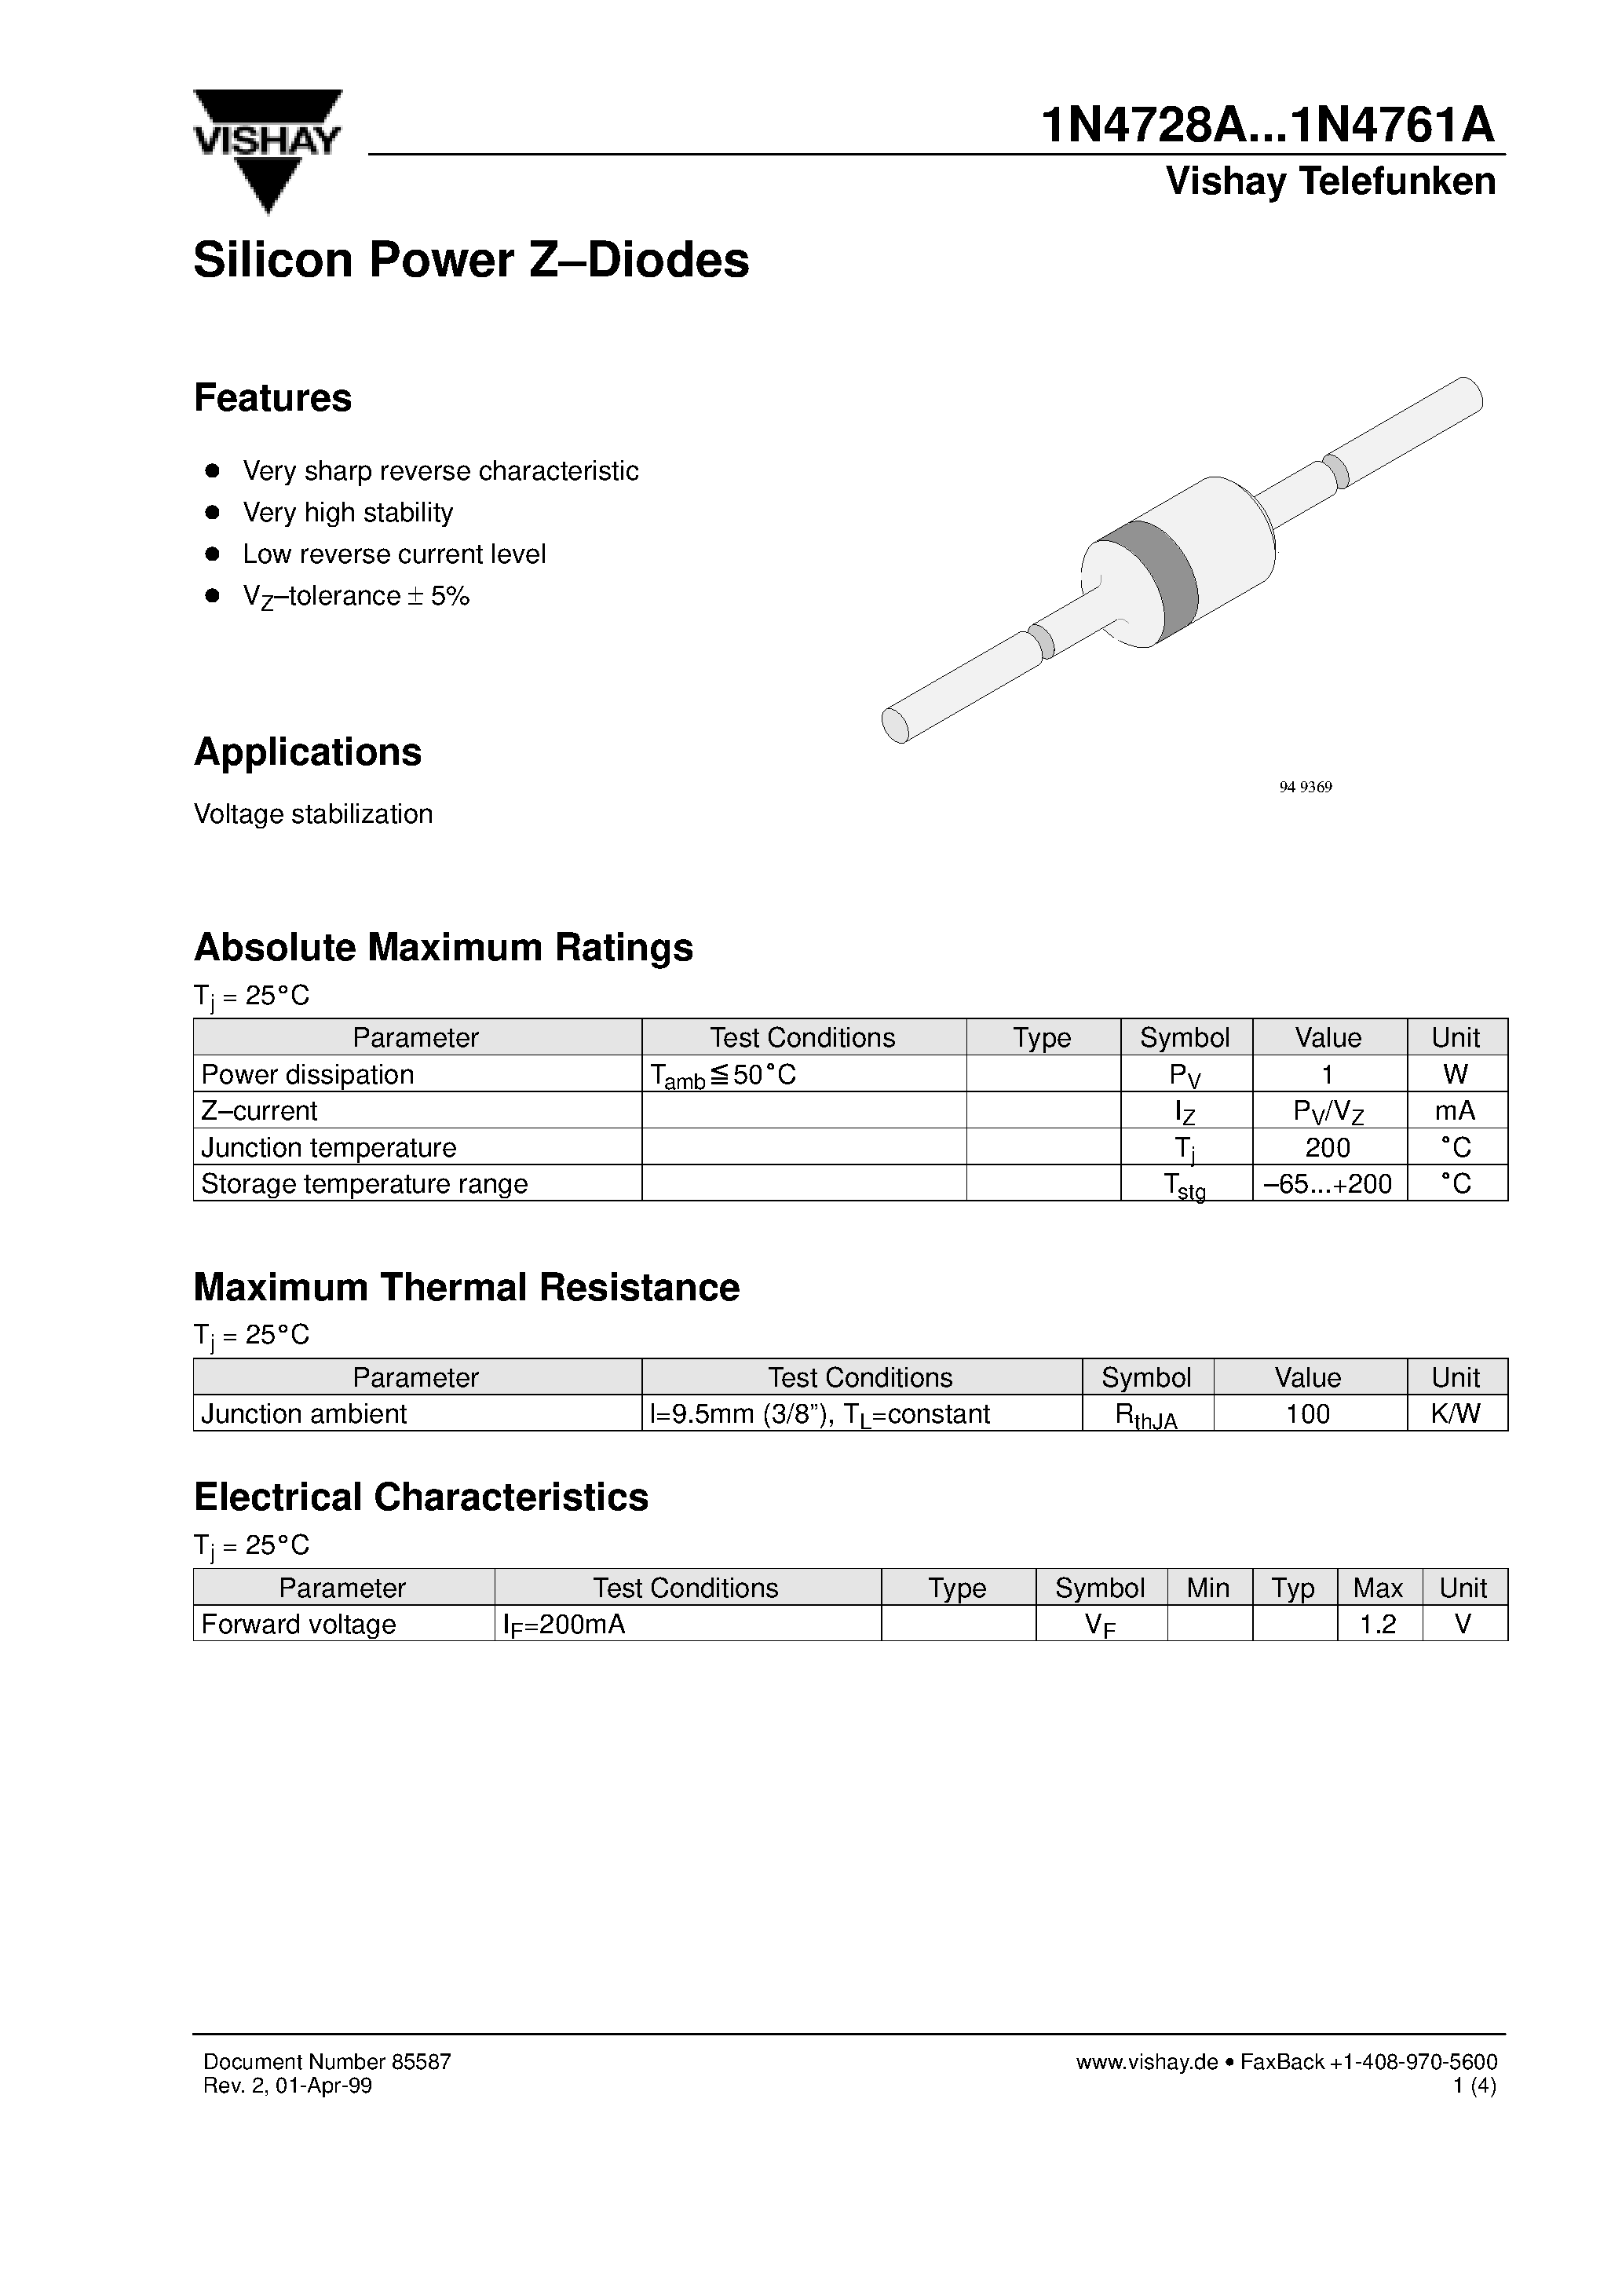 Даташит 1N4747A - Silicon Power Z-Diodes страница 1